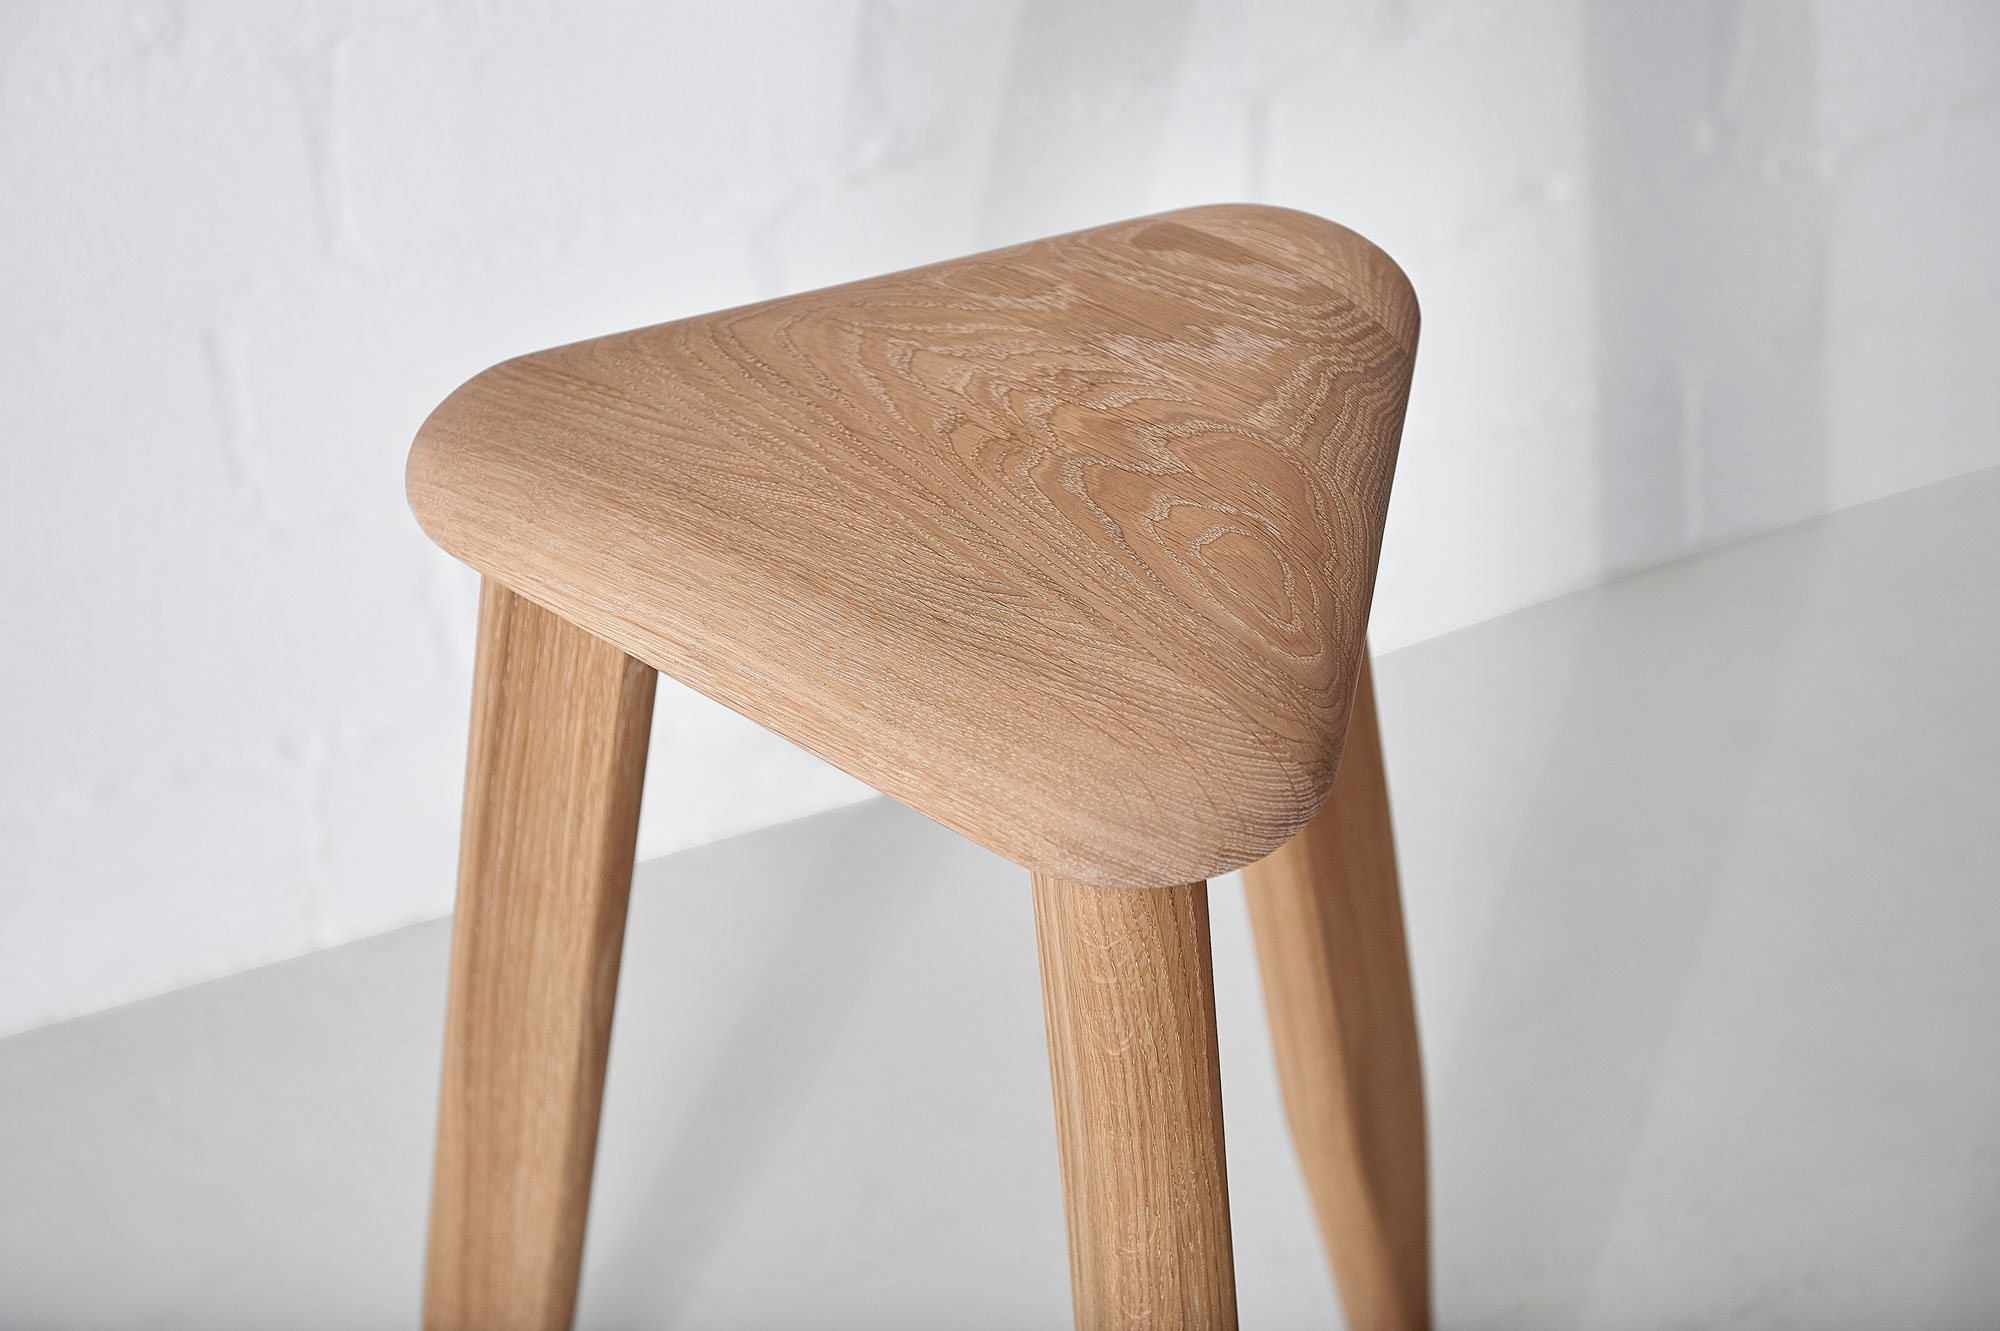 Triangle Wood Stool AETAS SPACE Edited custom made in solid wood by vitamin design